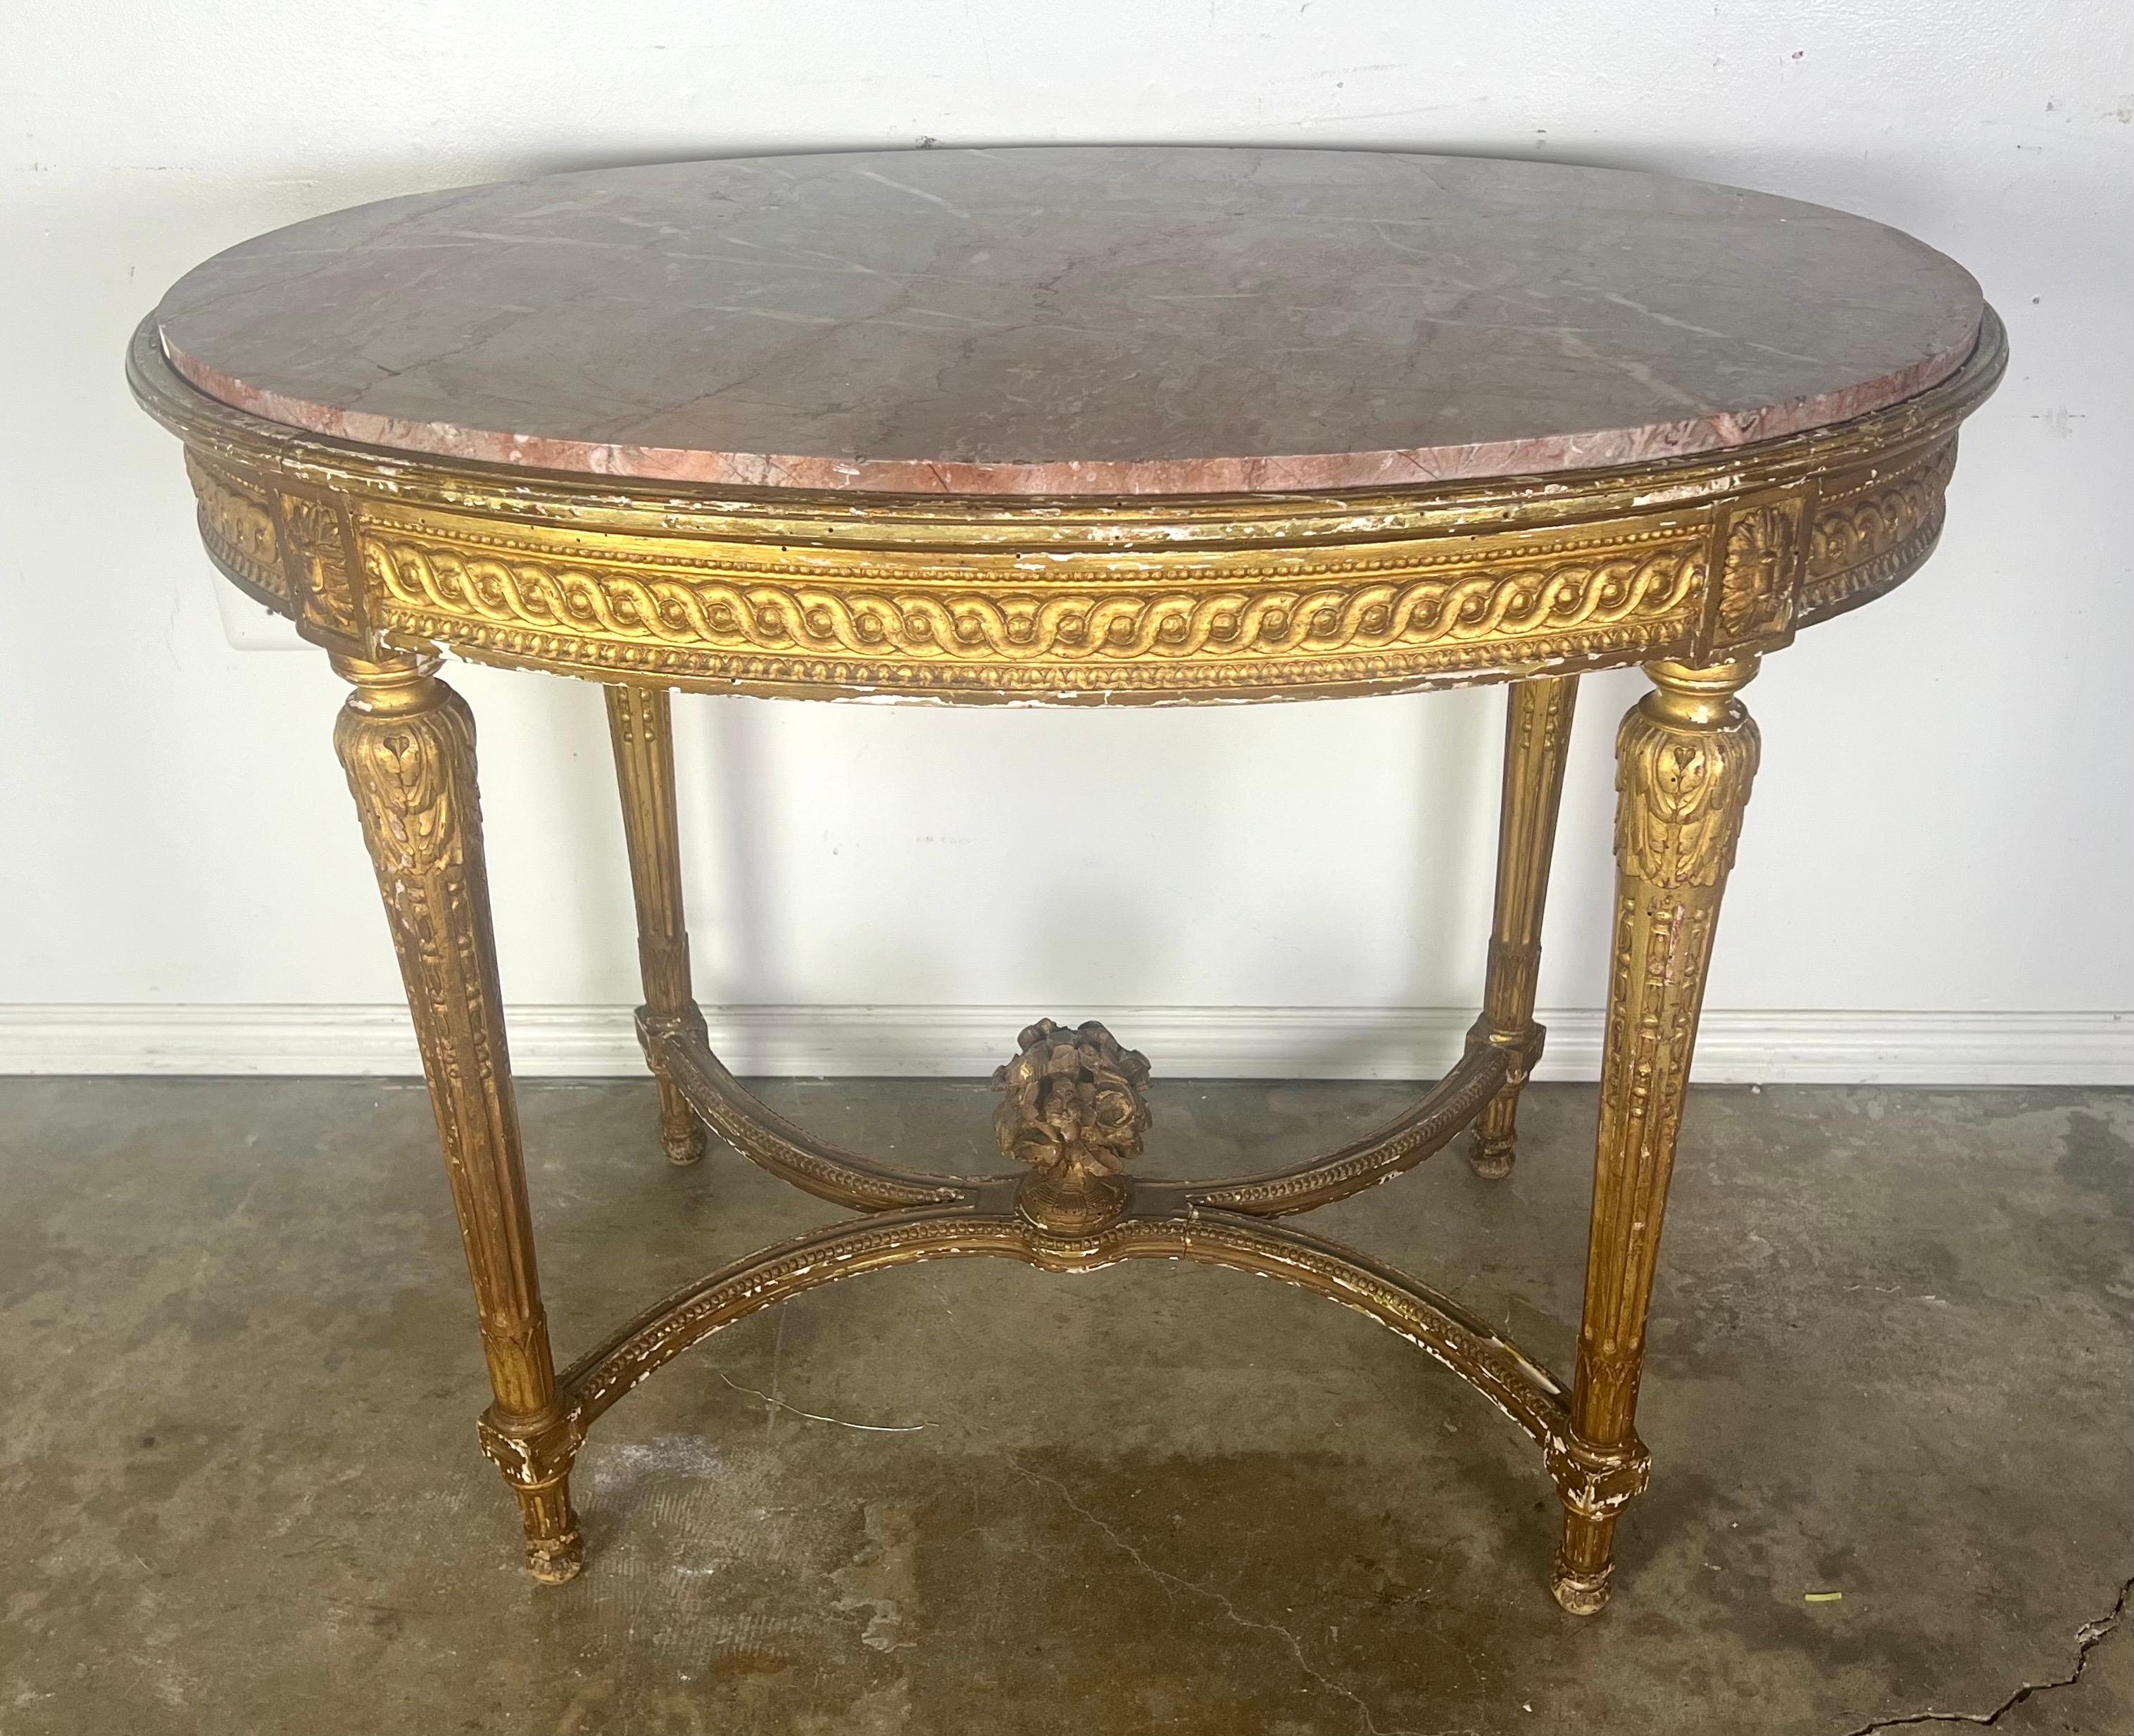 19th Century Louis XVI style oval table with marble top.  The table's gilt wood frame showcases the sophisticated restraint typical of Louis XVI style furniture, with a focus on straight lines and balanced proportions.  The four straight legs,